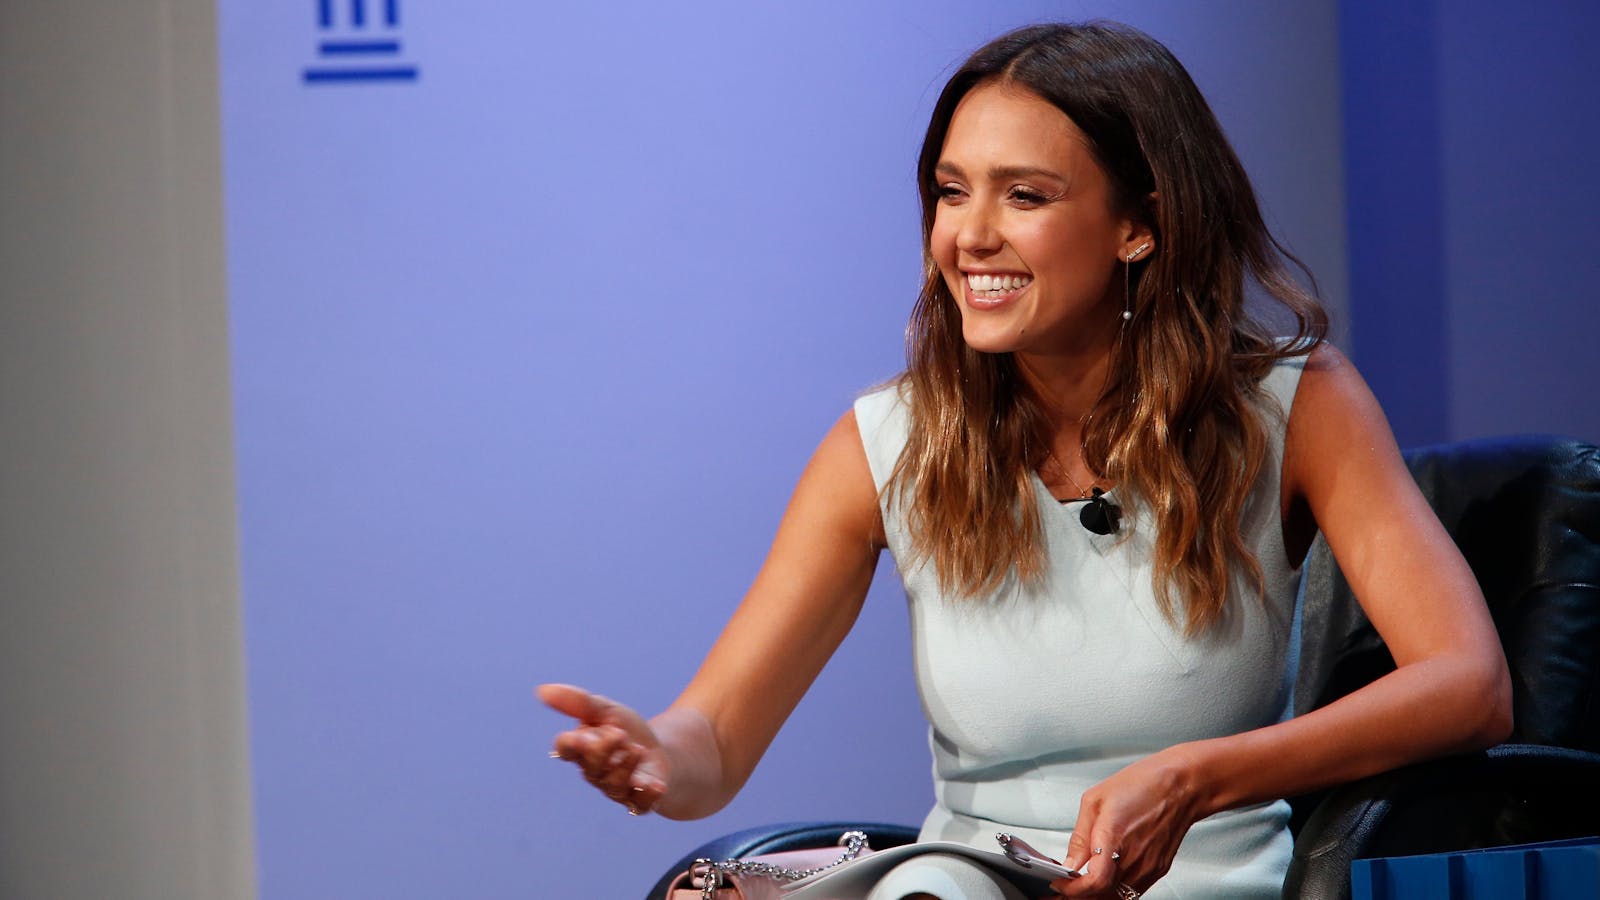 Honest Co. founder Jessica Alba. Photo by Bloomberg.